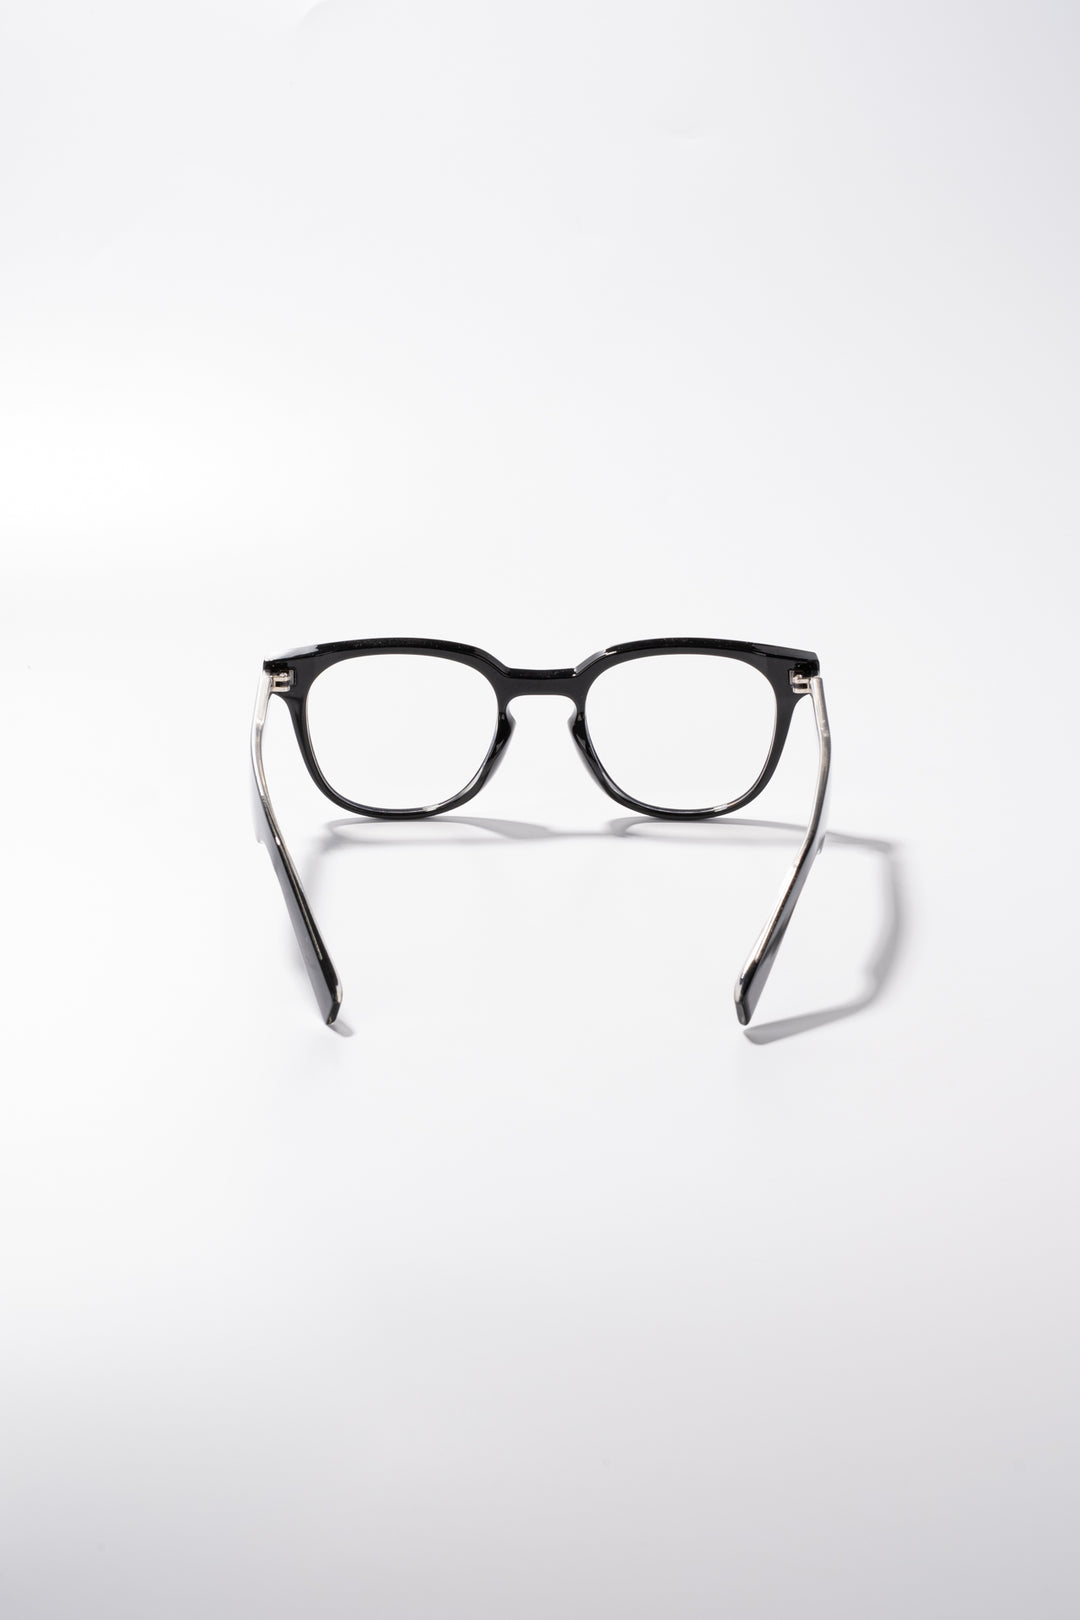 Type Blue Light Protection Glasses